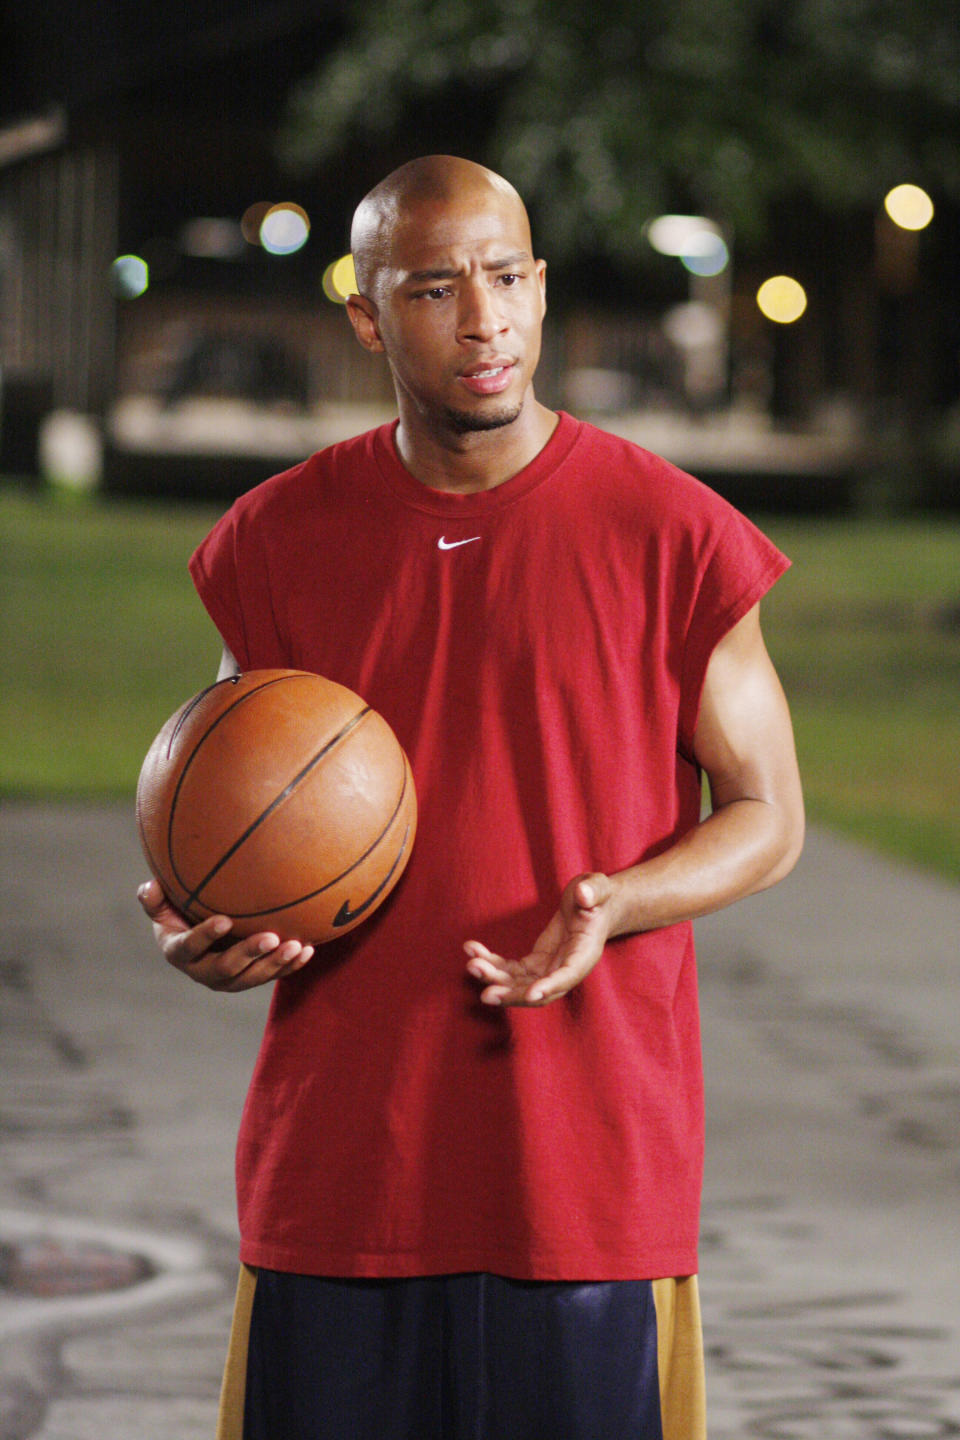 Antwon Tanner playing basketball on "One Tree Hill"